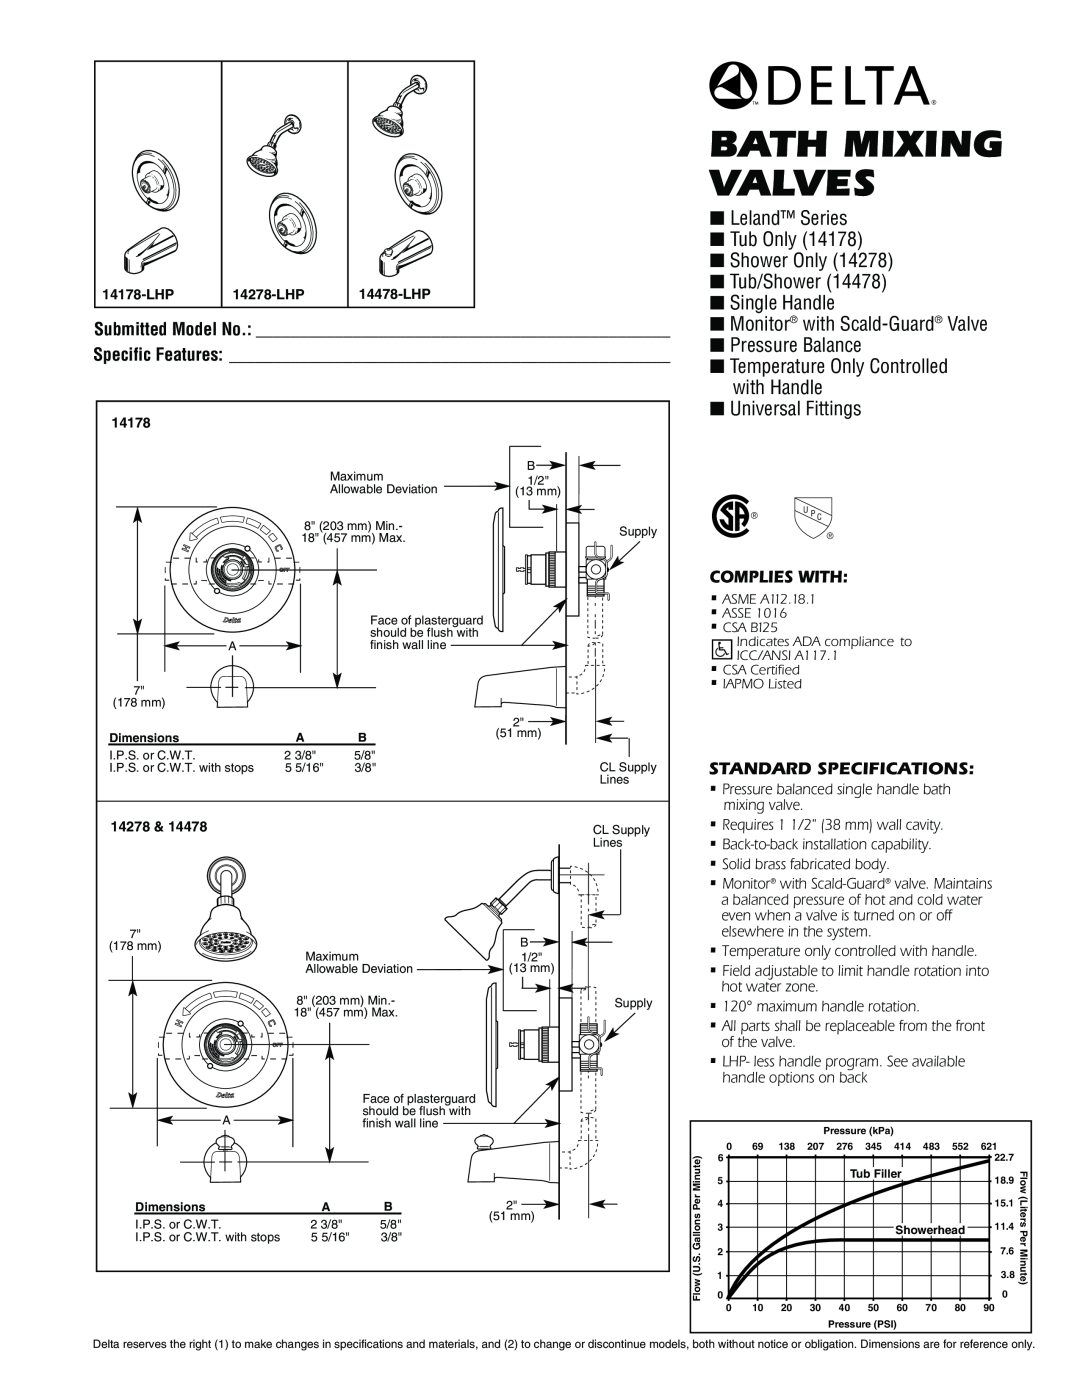 Delta 14278-LHP, 14178-LHP specifications Bath Mixing Valves, Leland Series Tub Only Shower Only Tub/Shower Single Handle 